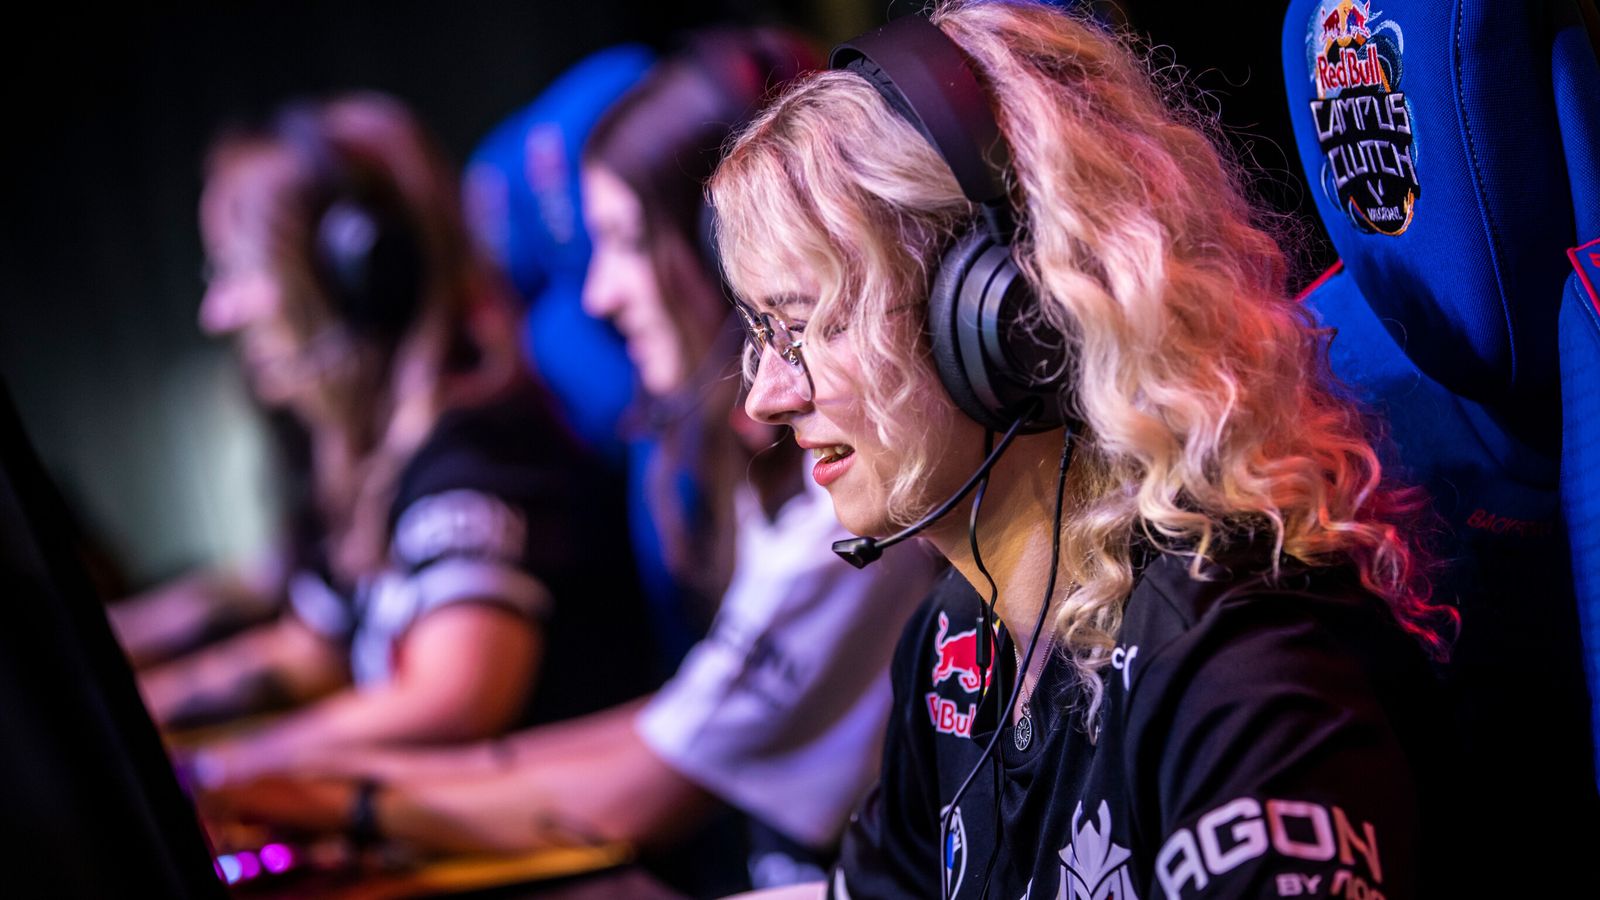 The female gamers competing for thousands of pounds at first event of its kind in UK | Science & Tech News